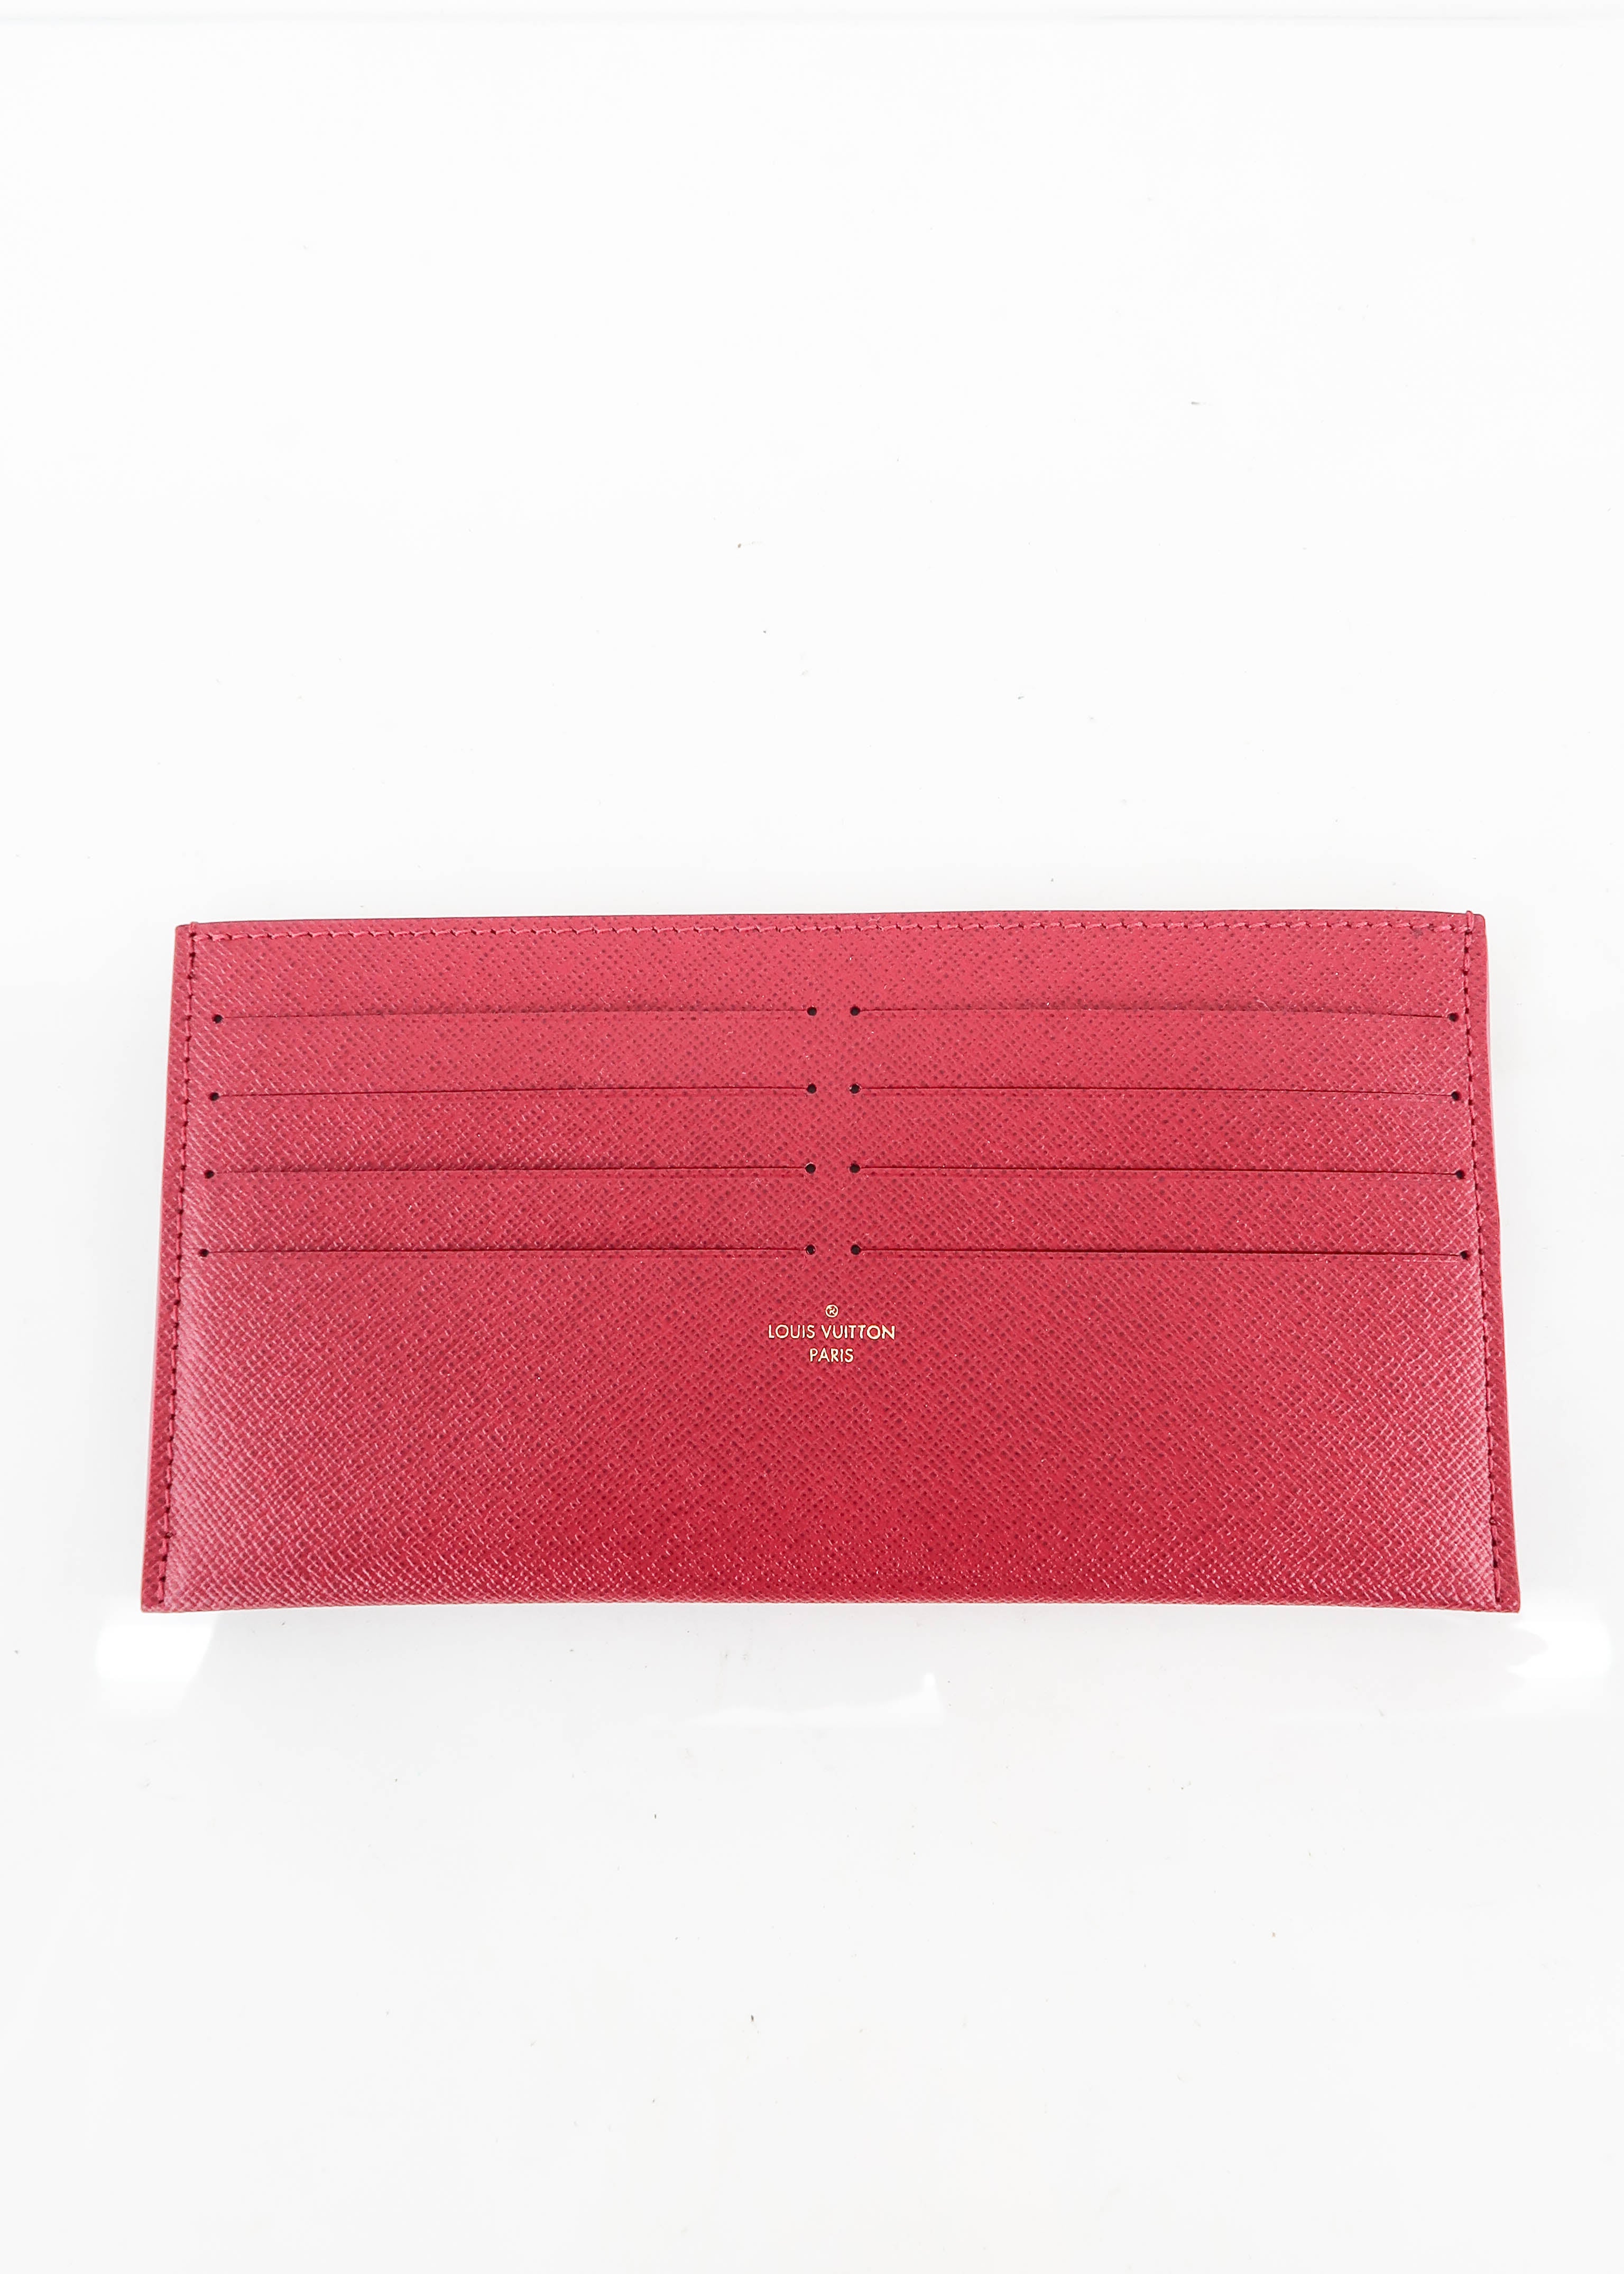 Buy Louis Vuitton Credit Card Cerise Red Insert From Felicie Pochette  Wallet A952